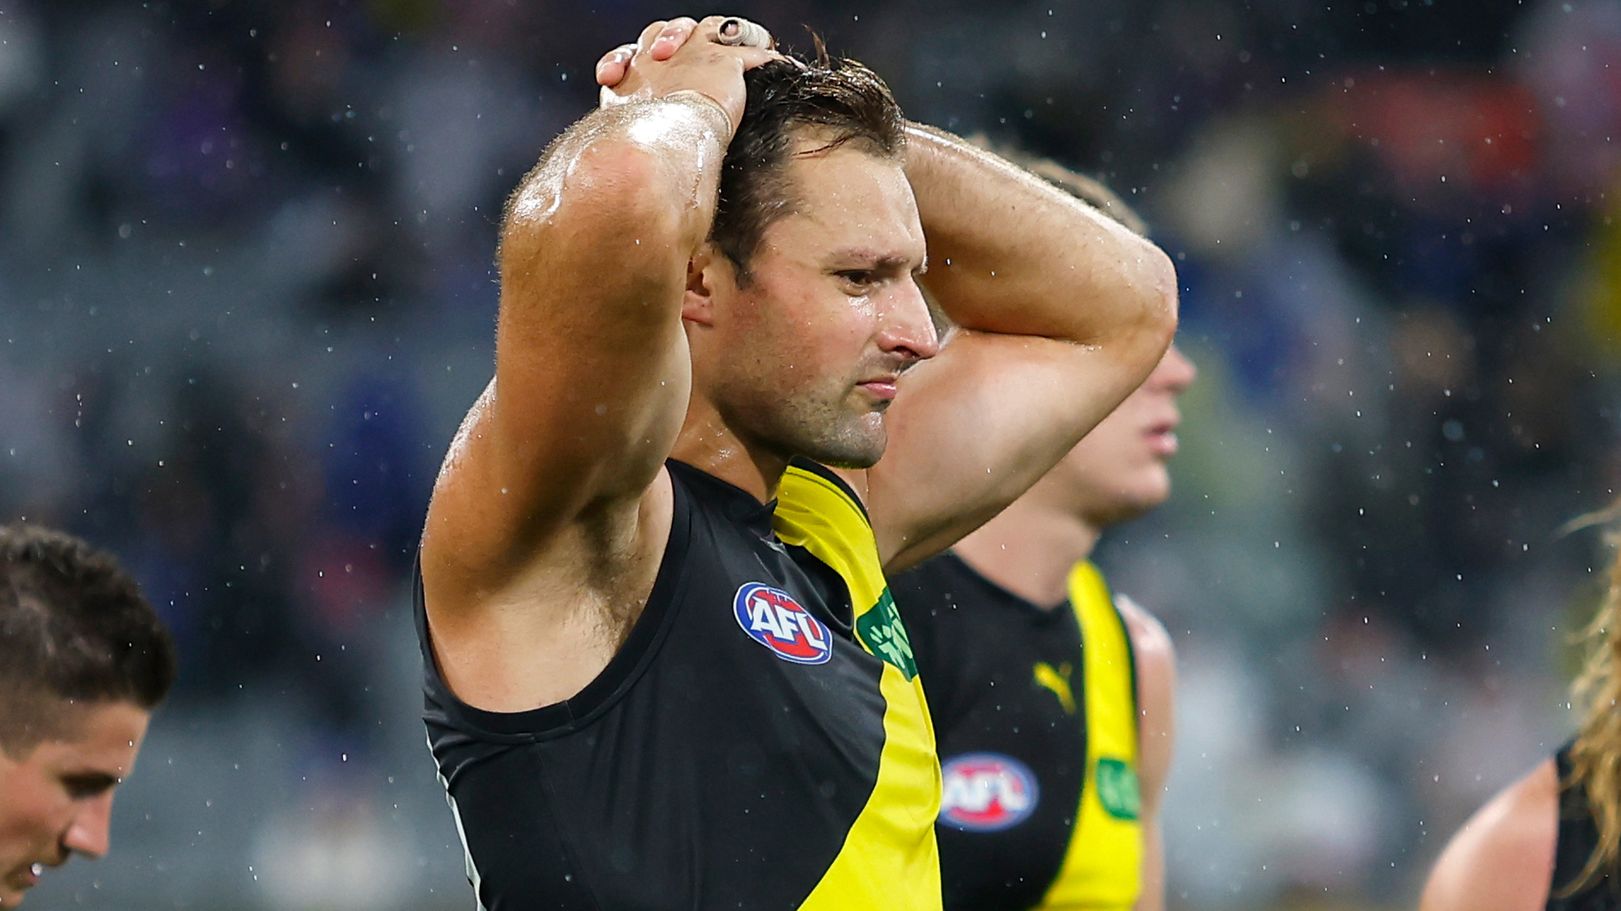 MELBOURNE - APRIL 08: Toby Nankervis of the Tigers looks dejected after a loss during the 2023 AFL Round 04 match between the Richmond Tigers and the Western Bulldogs at the Melbourne Cricket Ground on April 8, 2023 in Melbourne, Australia. (Photo by Dylan Burns/AFL Photos)